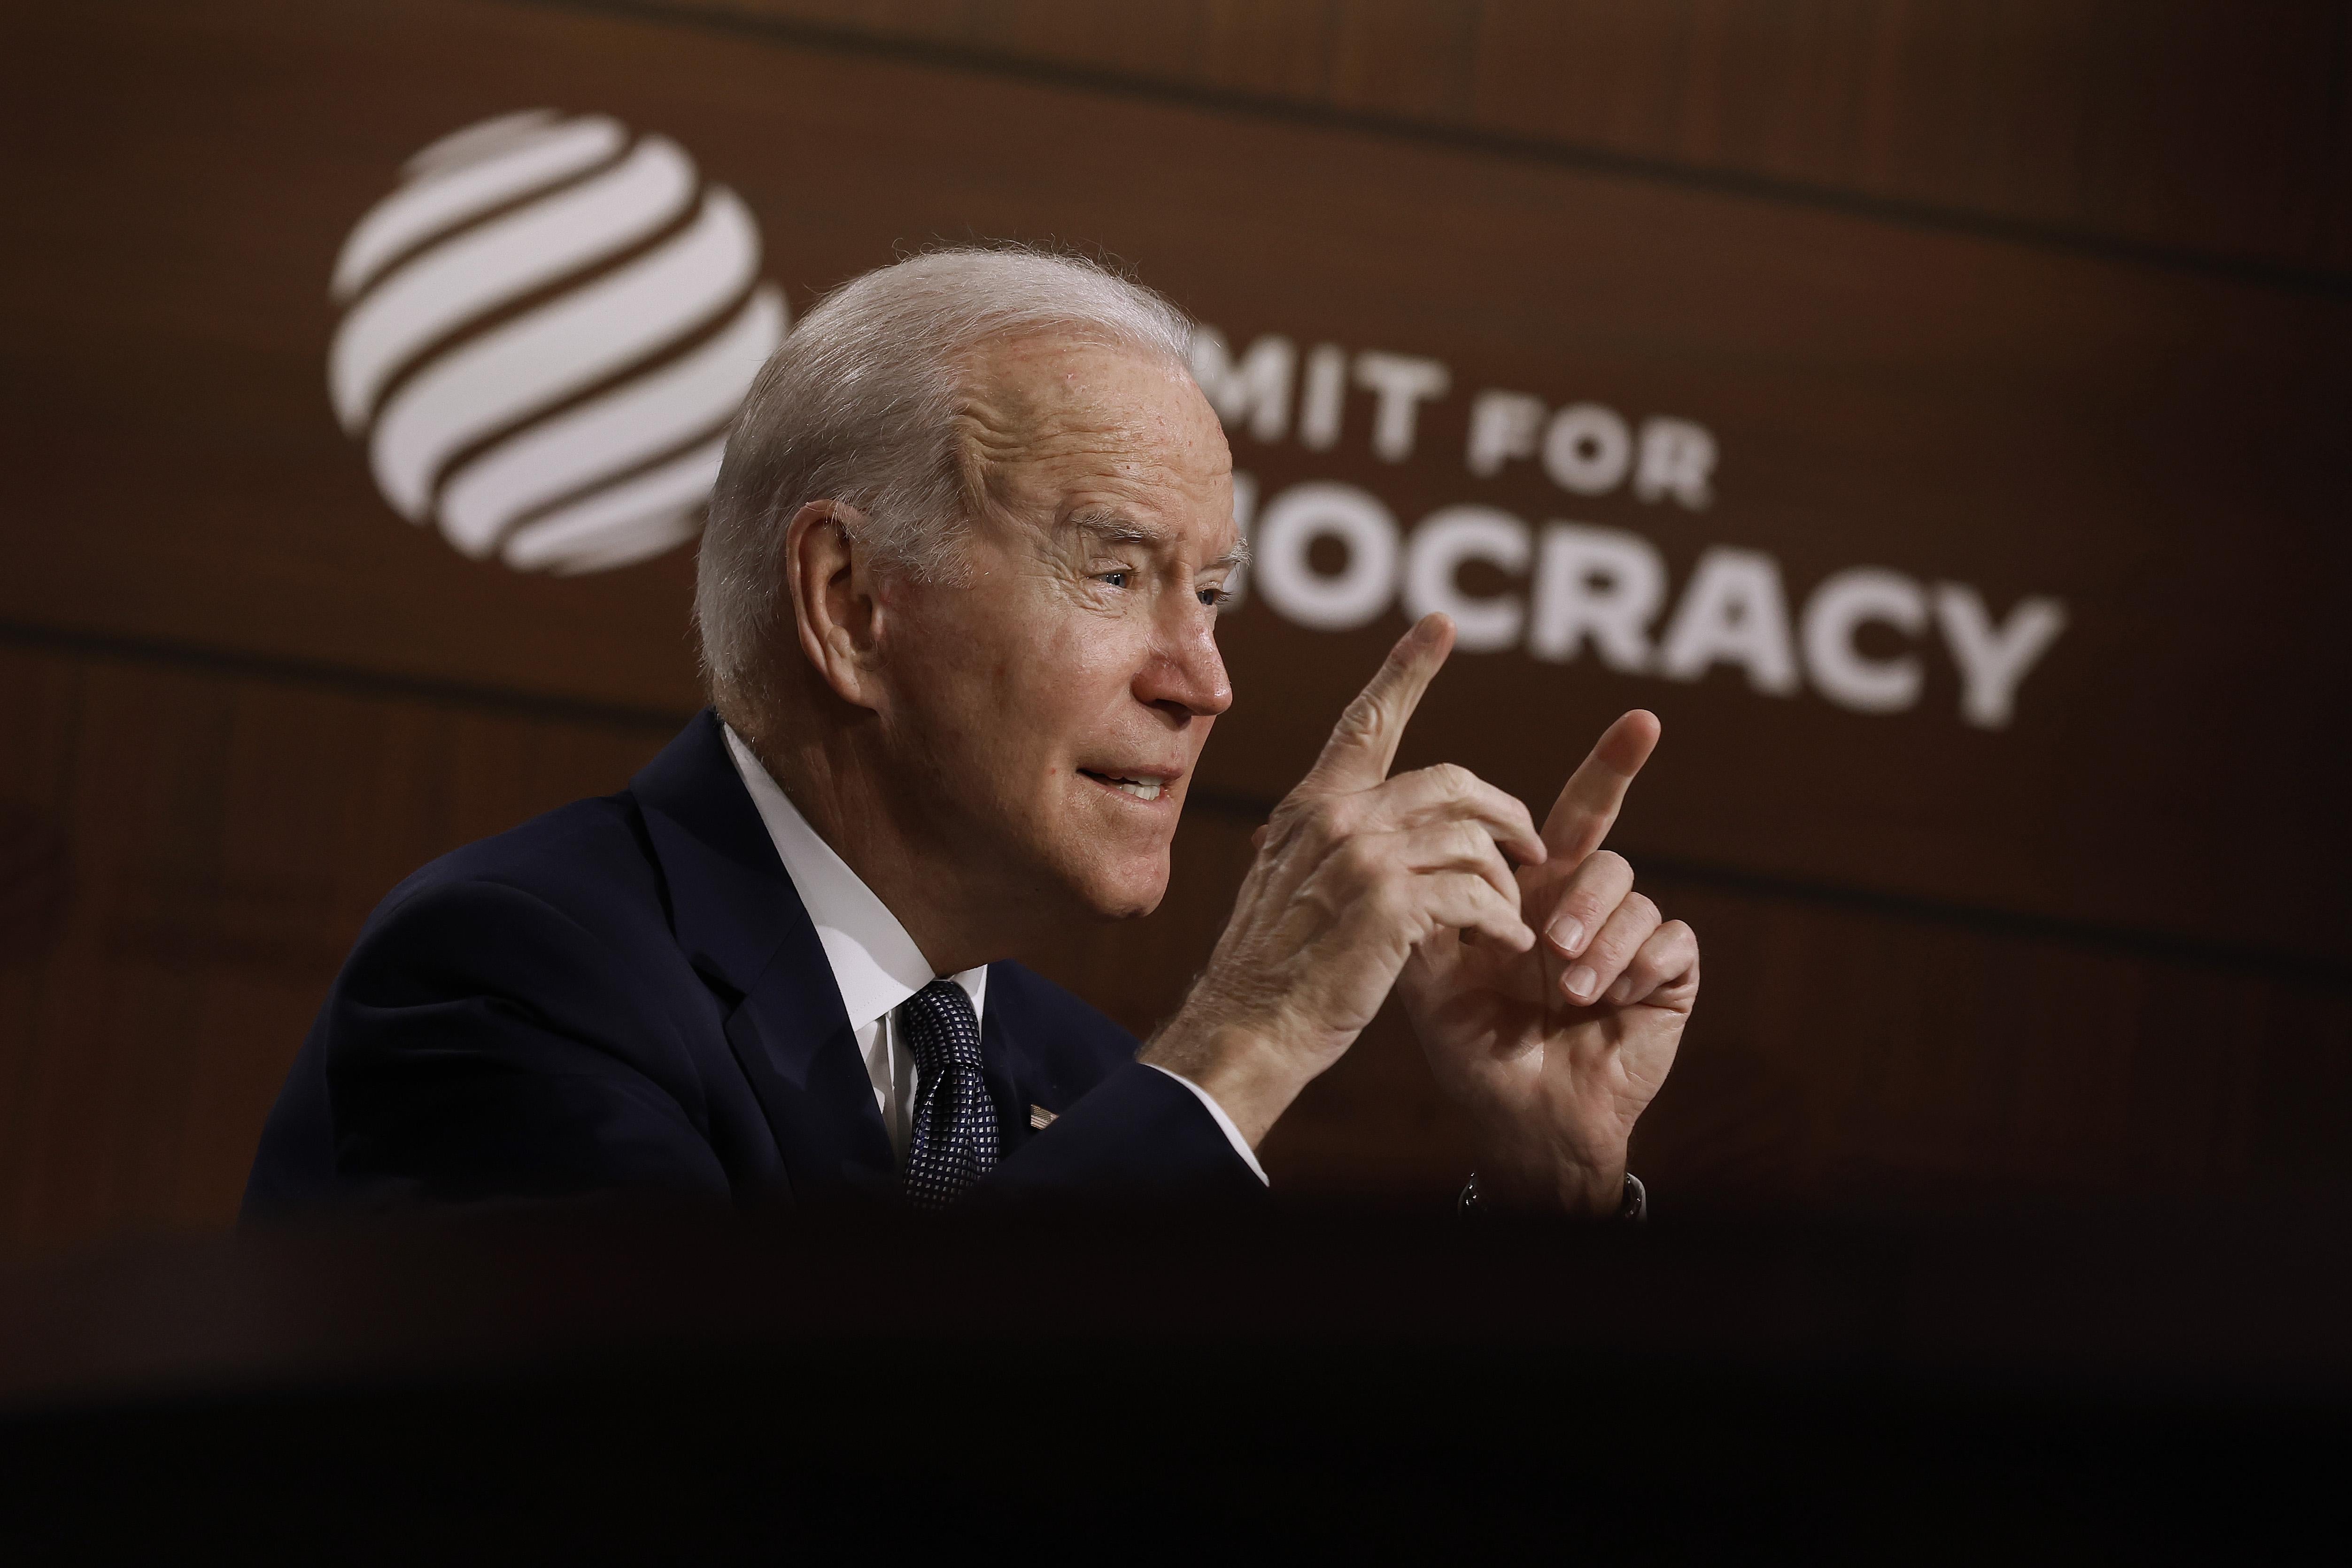 Biden gestures with both hands as he speaks in front of a backdrop that says "Summit for Democracy"